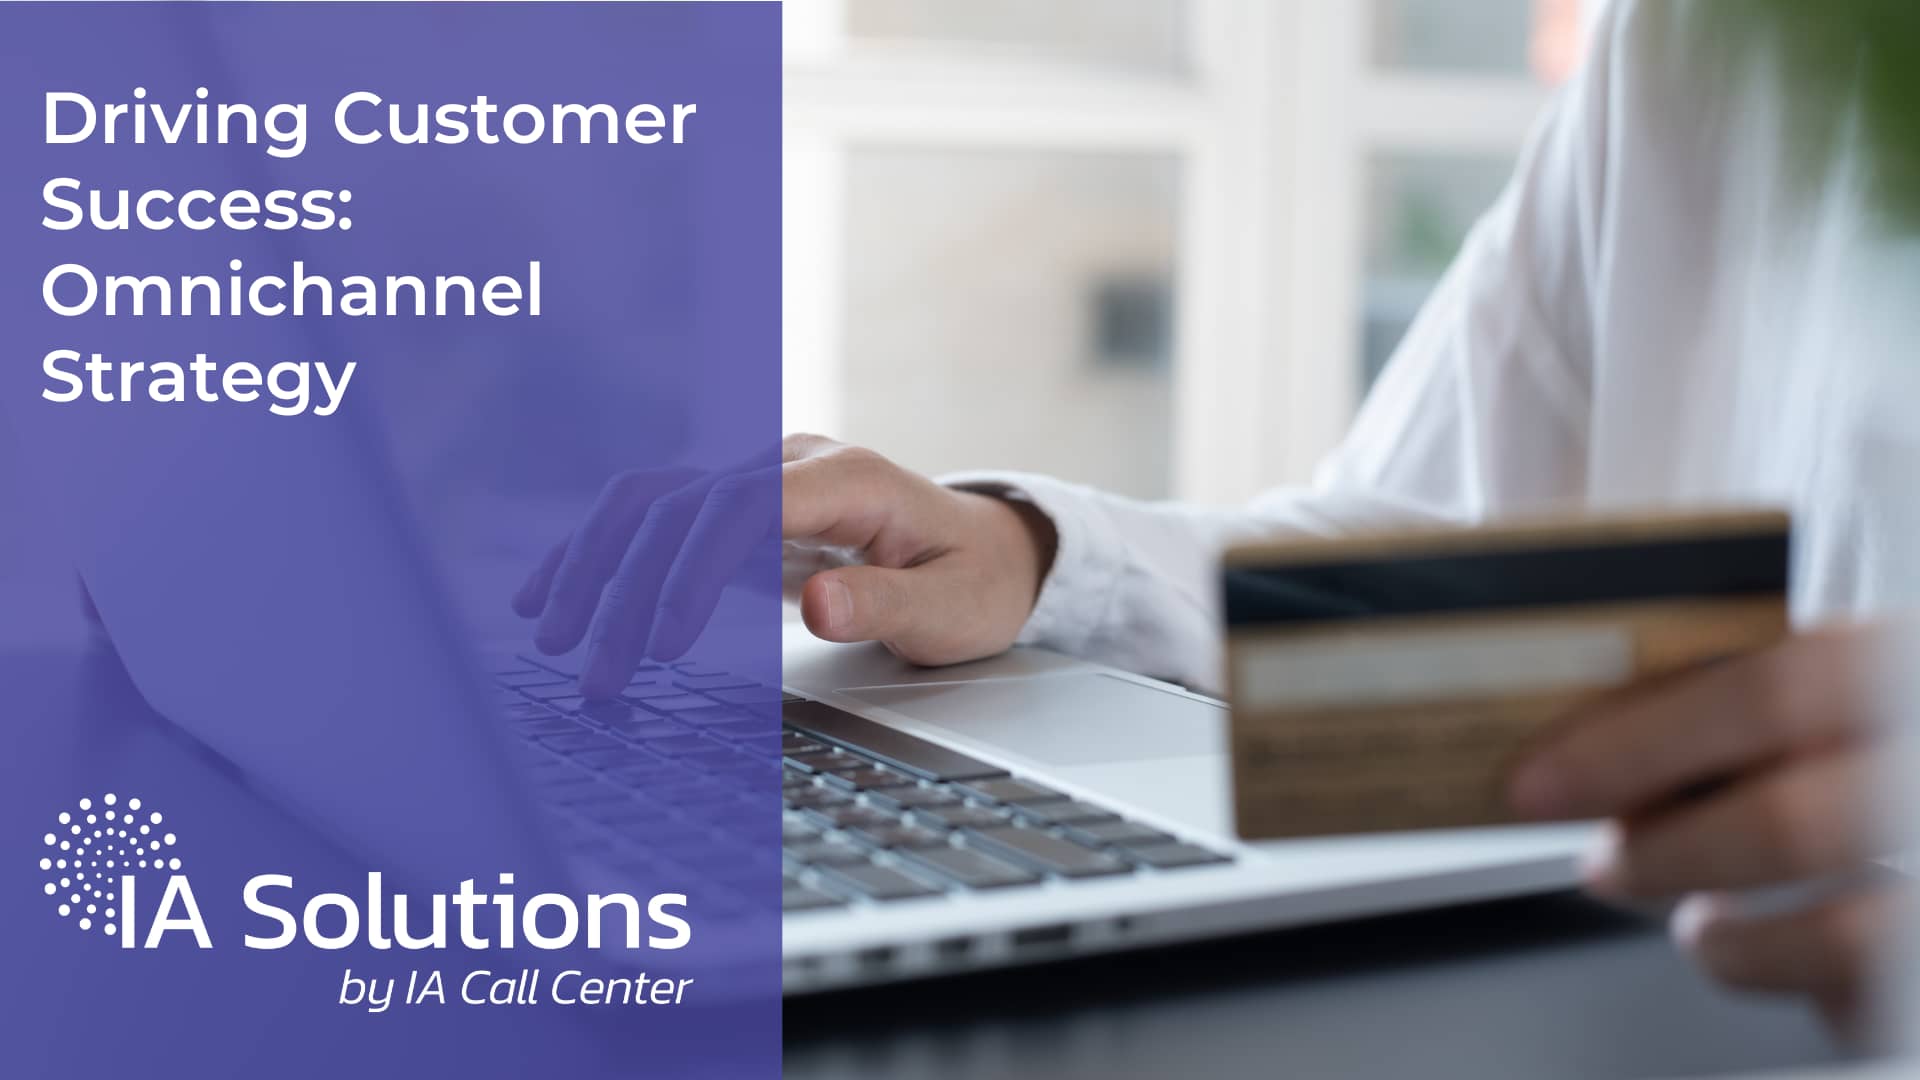 Driving Customer Success: Omnichannel Strategy